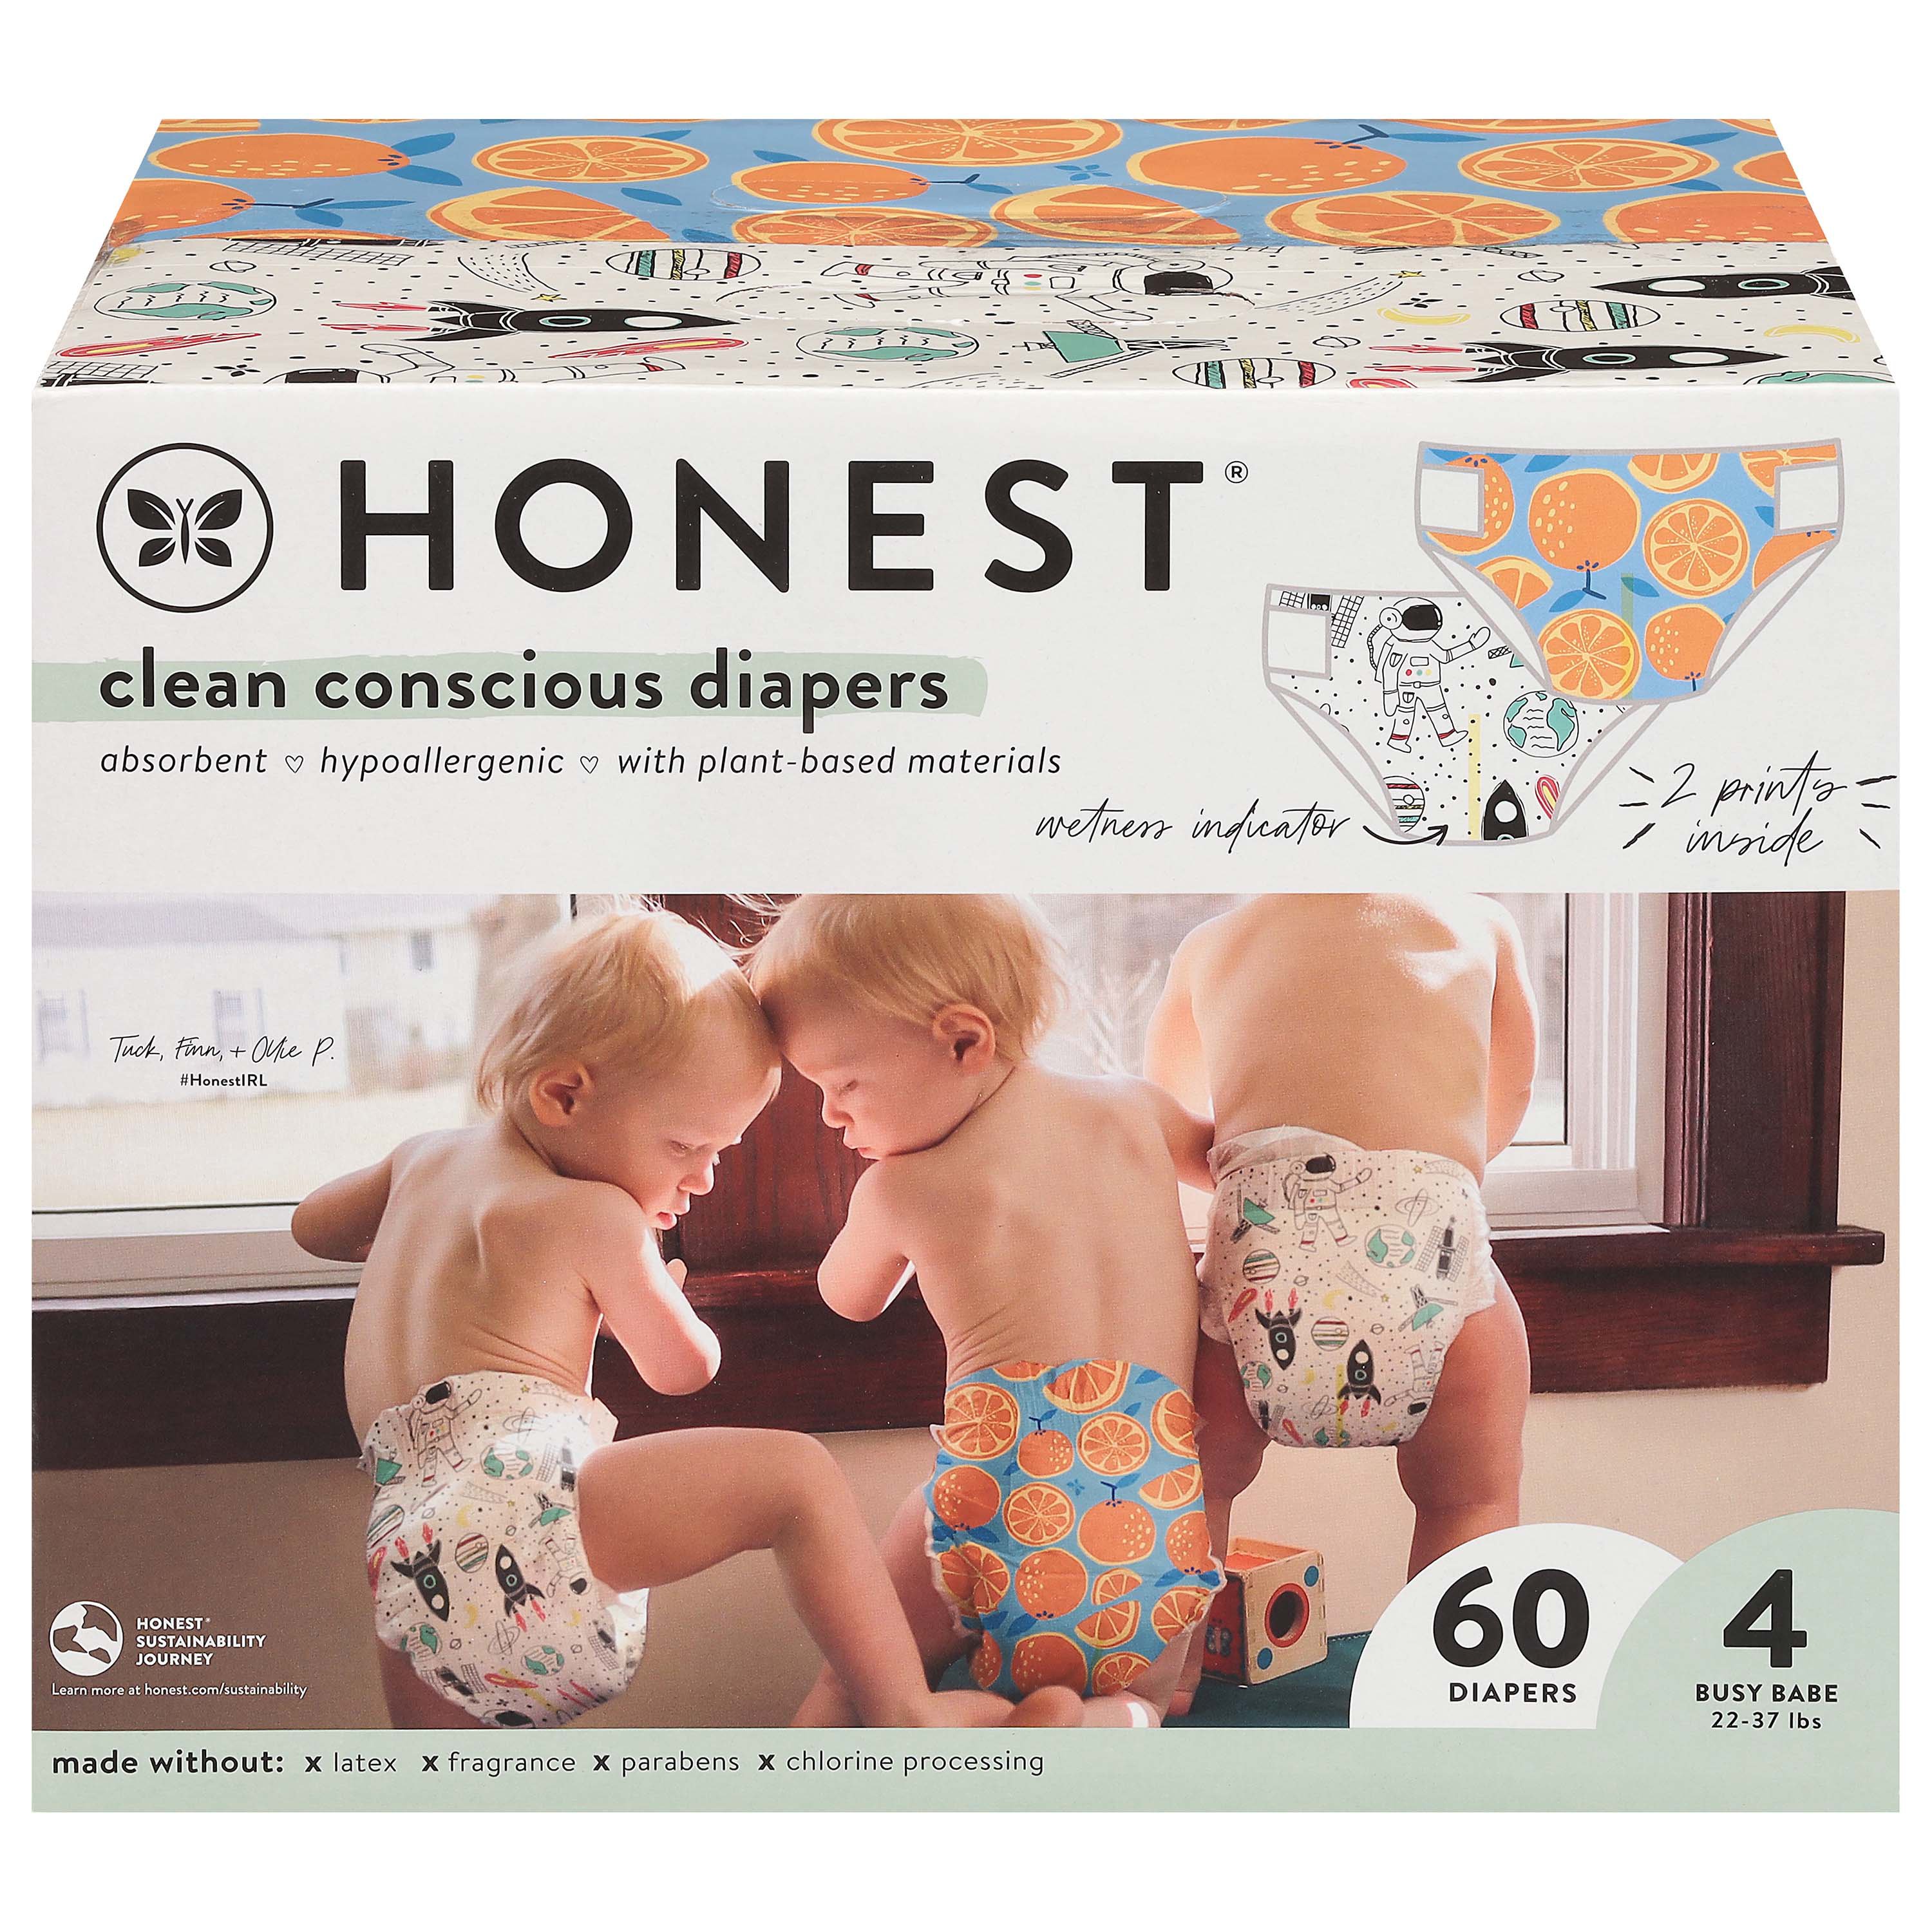 The Honest Company Clean Conscious Diapers Club Box - Size 4, 2 Print Pack  - Shop Diapers at H-E-B